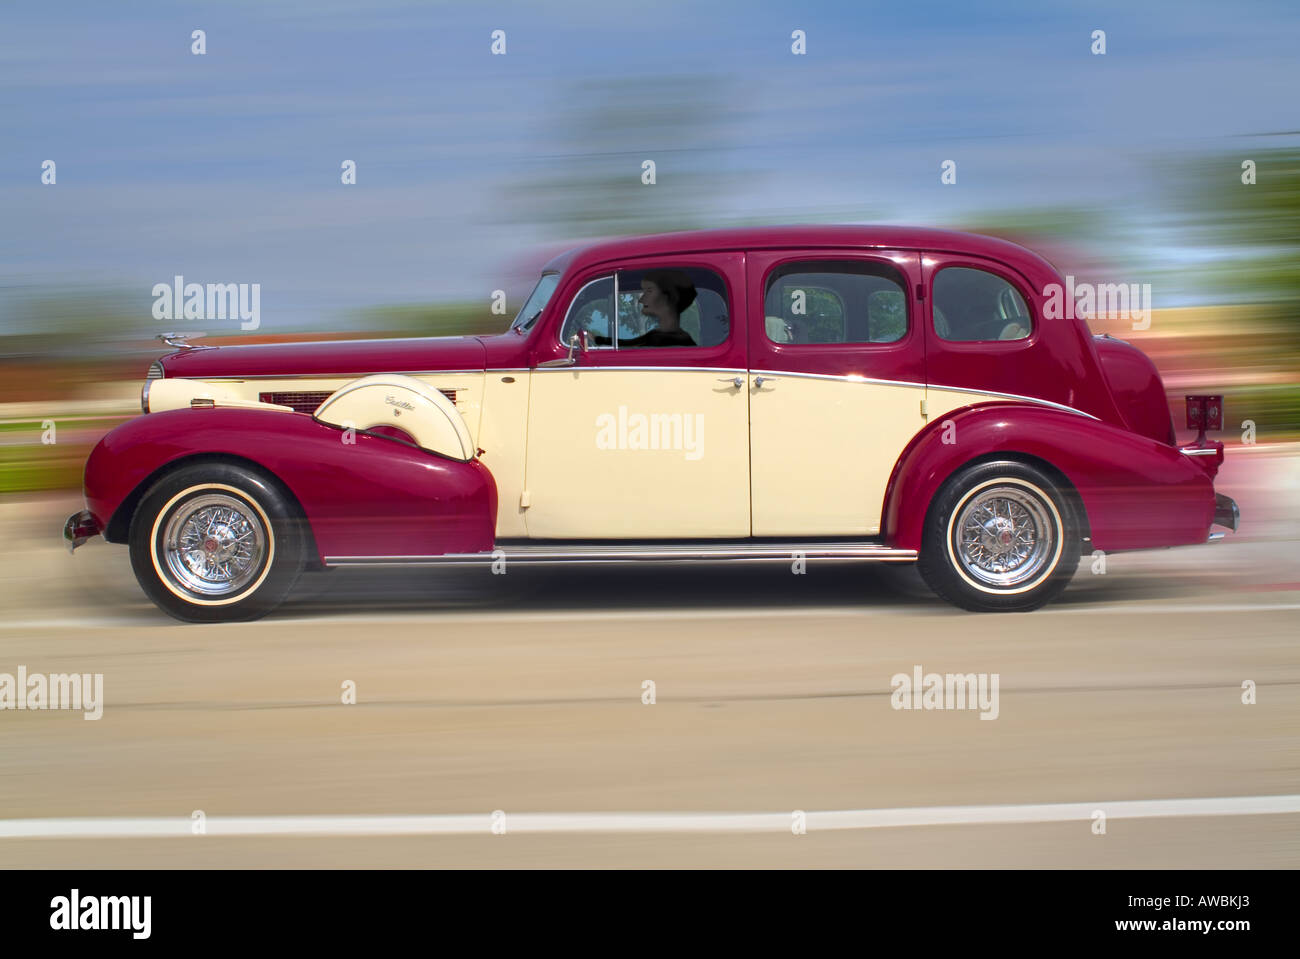 Side view of a 1937 Cadillac automobile in motion Stock Photo